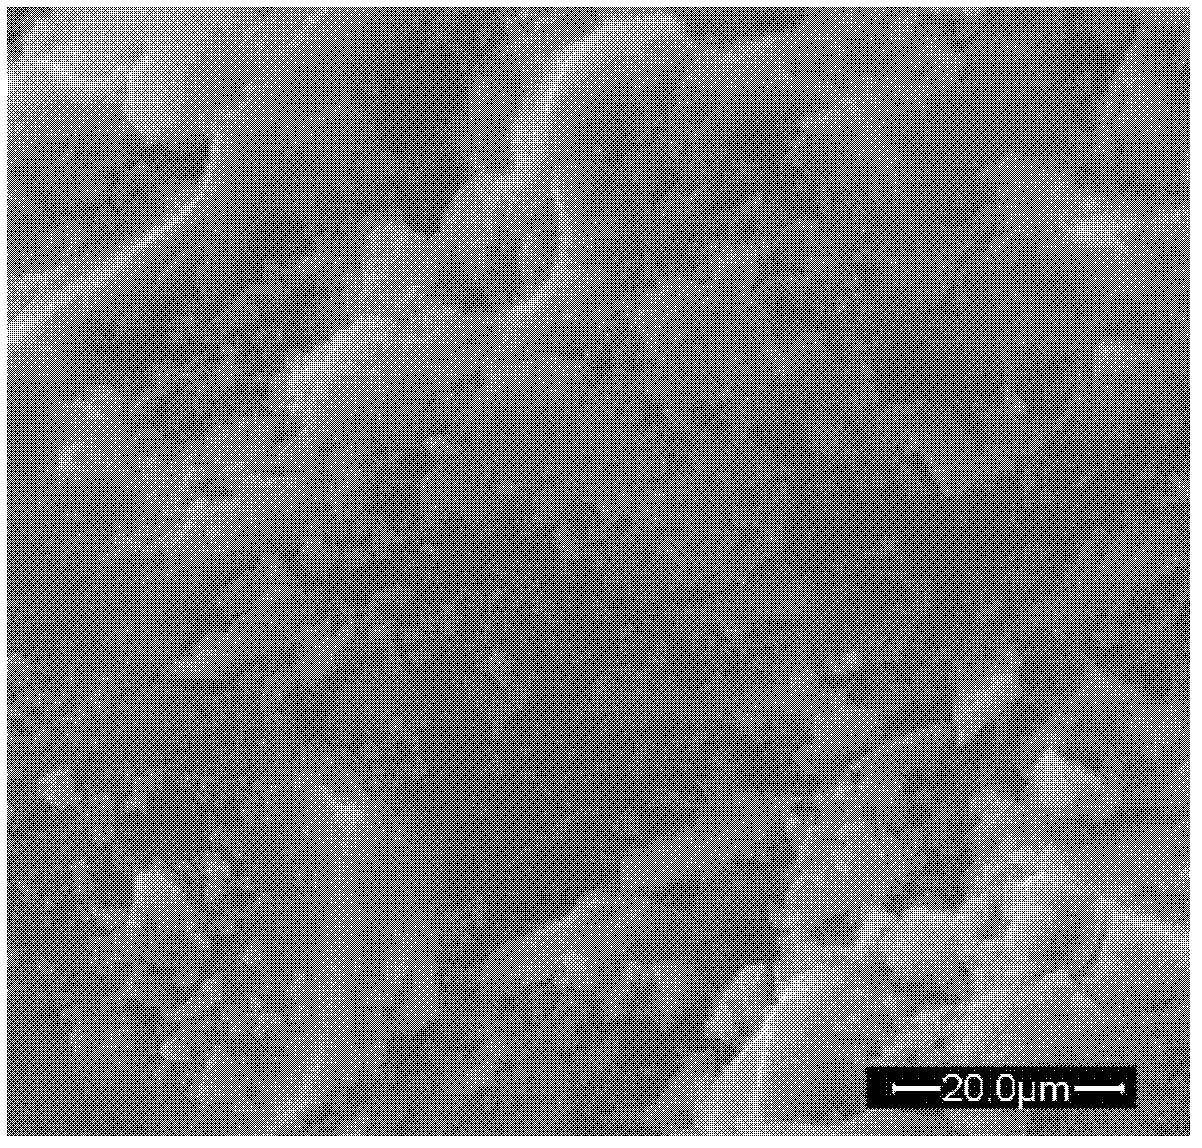 Electroconductive woodceramic powder and its manufacturing method